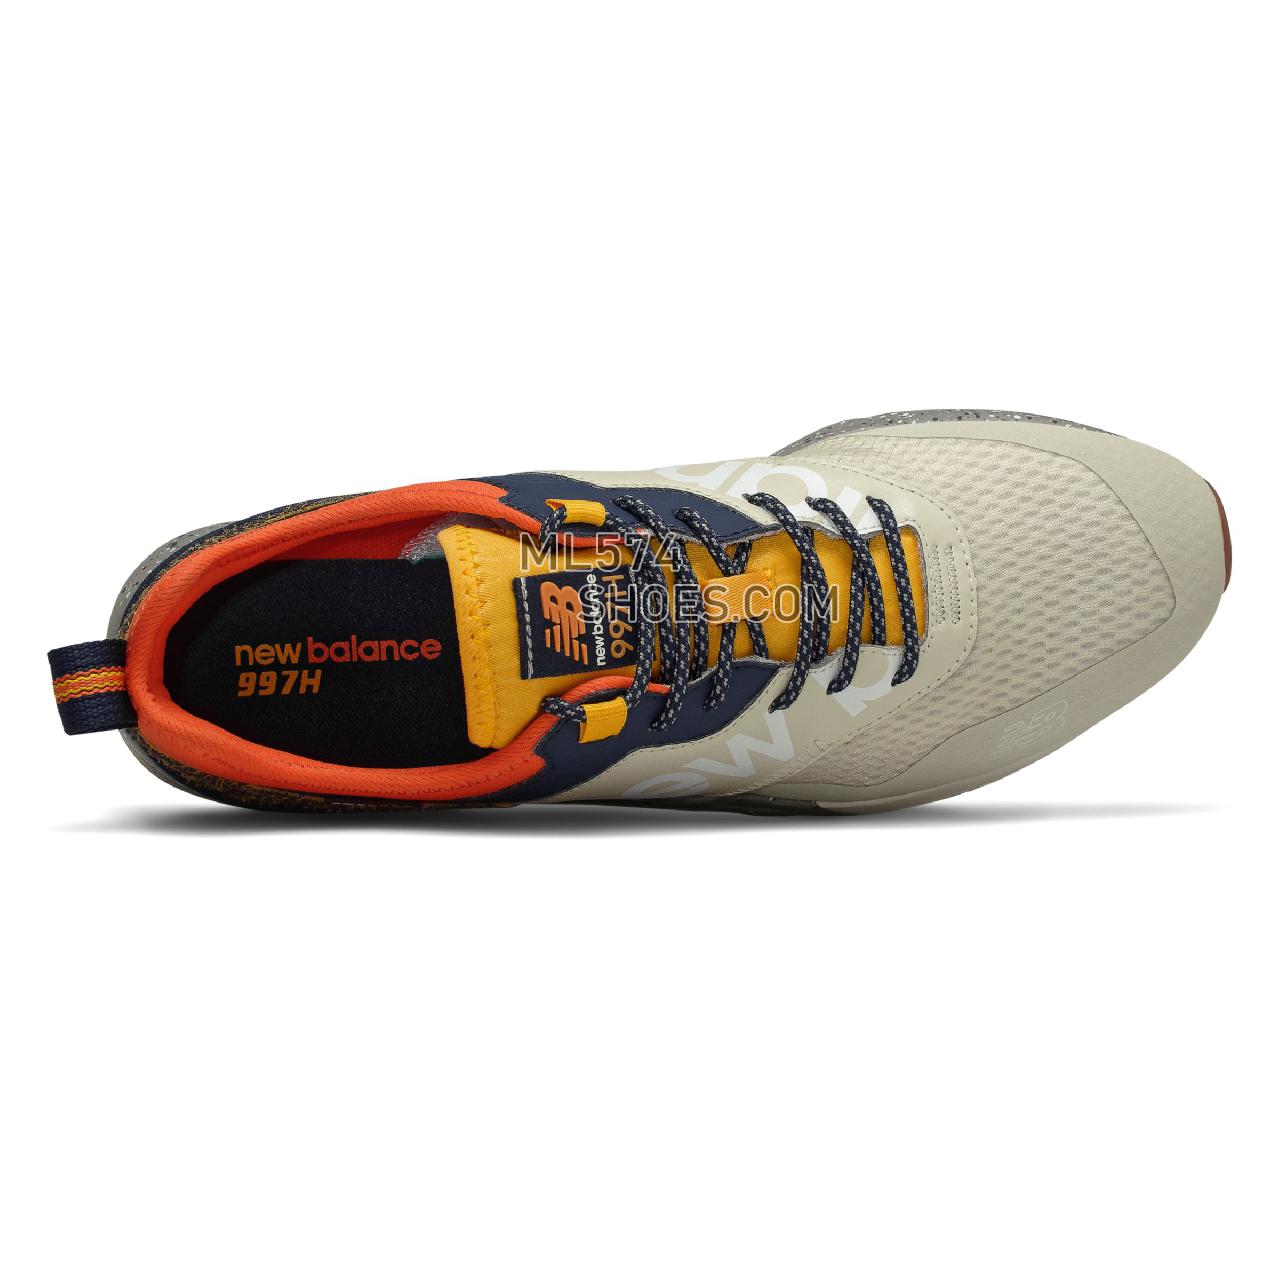 New Balance 997H Spring Hike Trail - Men's 997H Spring Hike Trail Classic - Oyster with Team Orange - CMT997HC